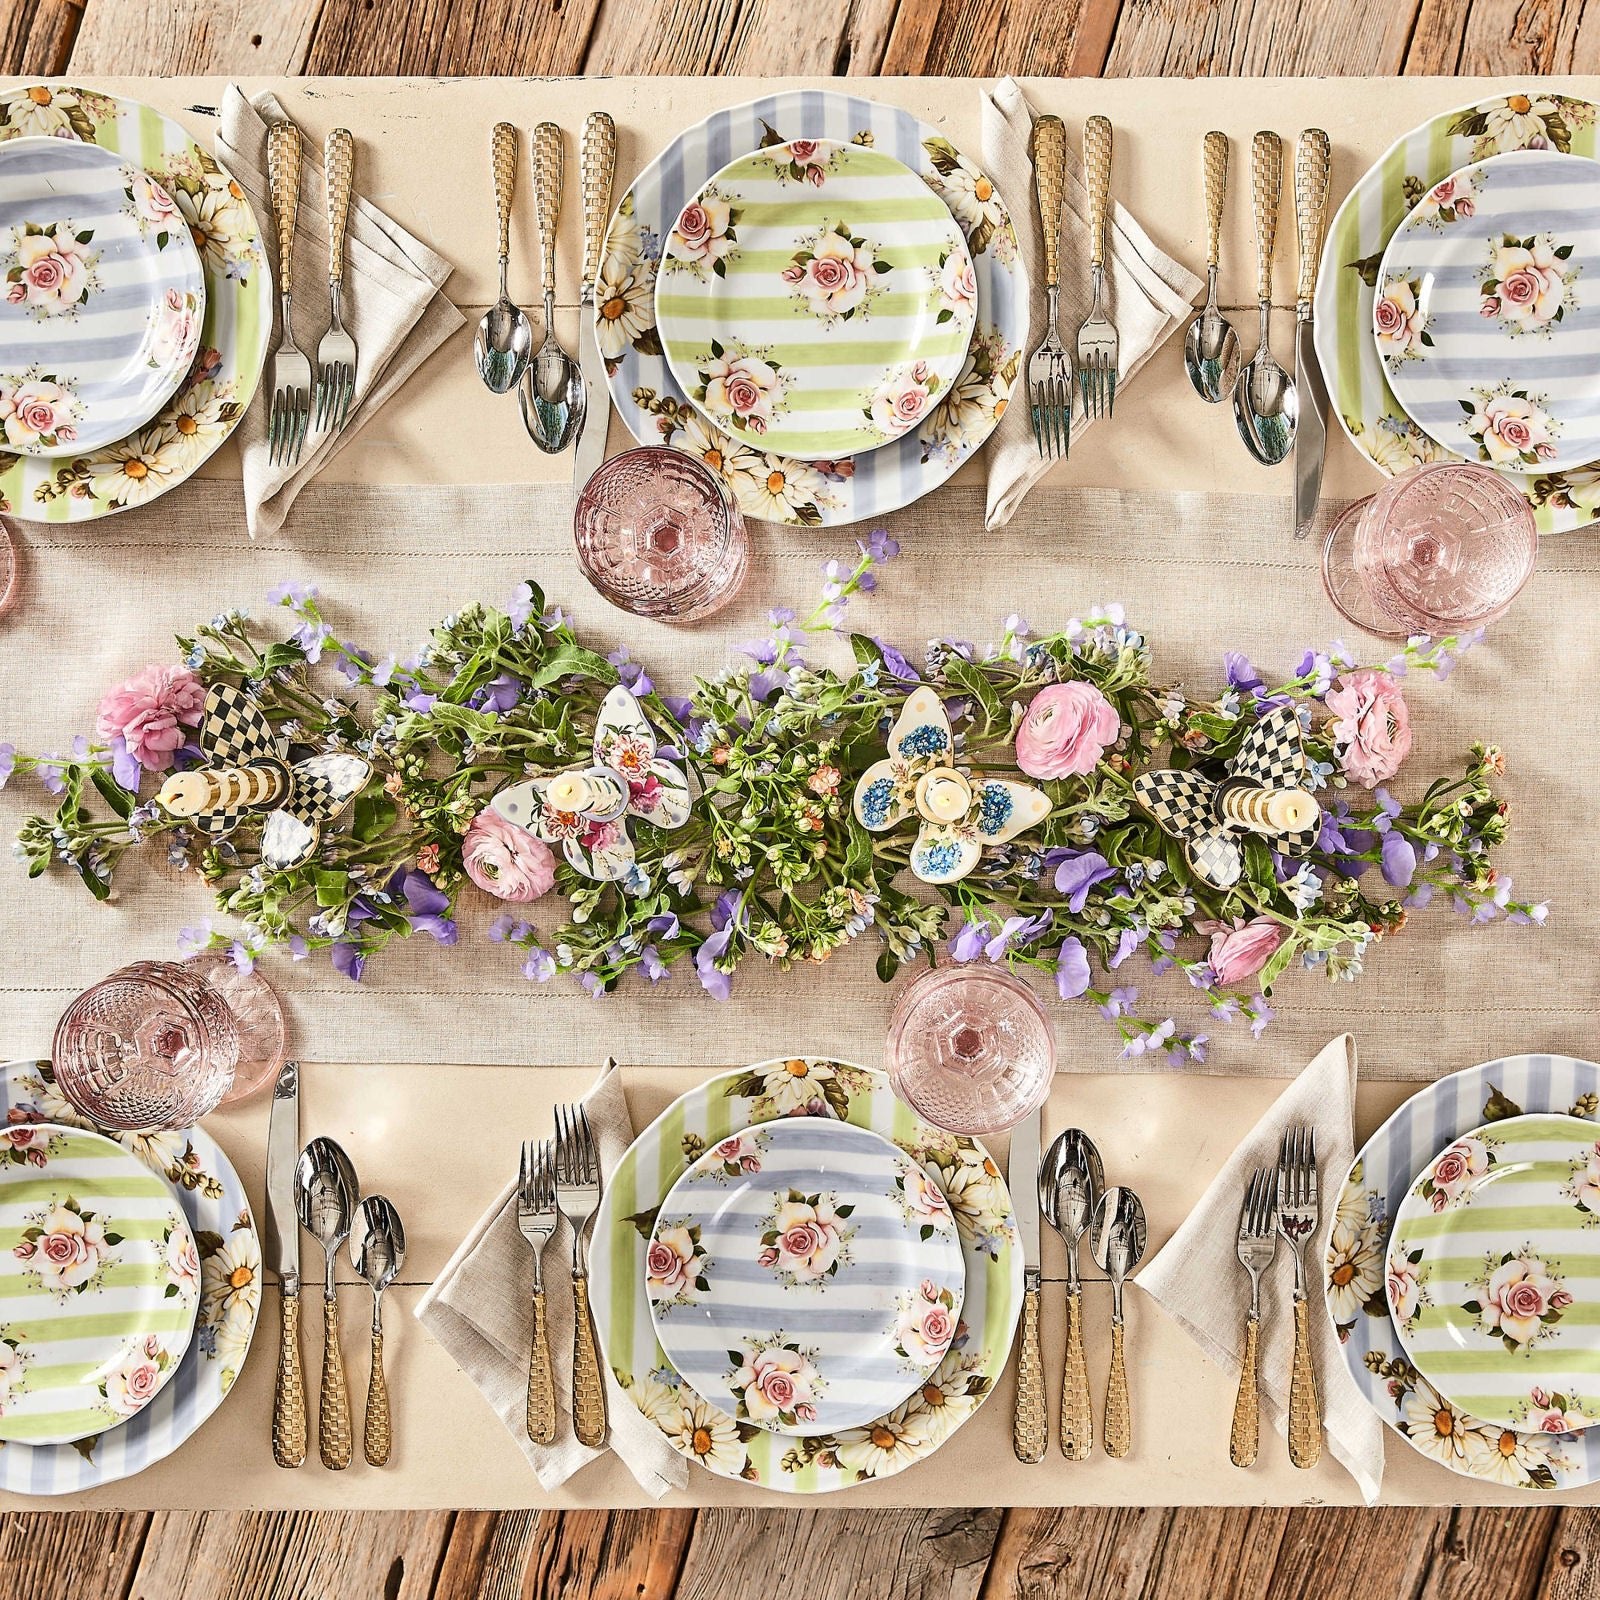 Wildflowers Porcelain Dinner Plate Green by Mackenzie-Childs - |VESIMI Design| Luxury and Rustic bathrooms online